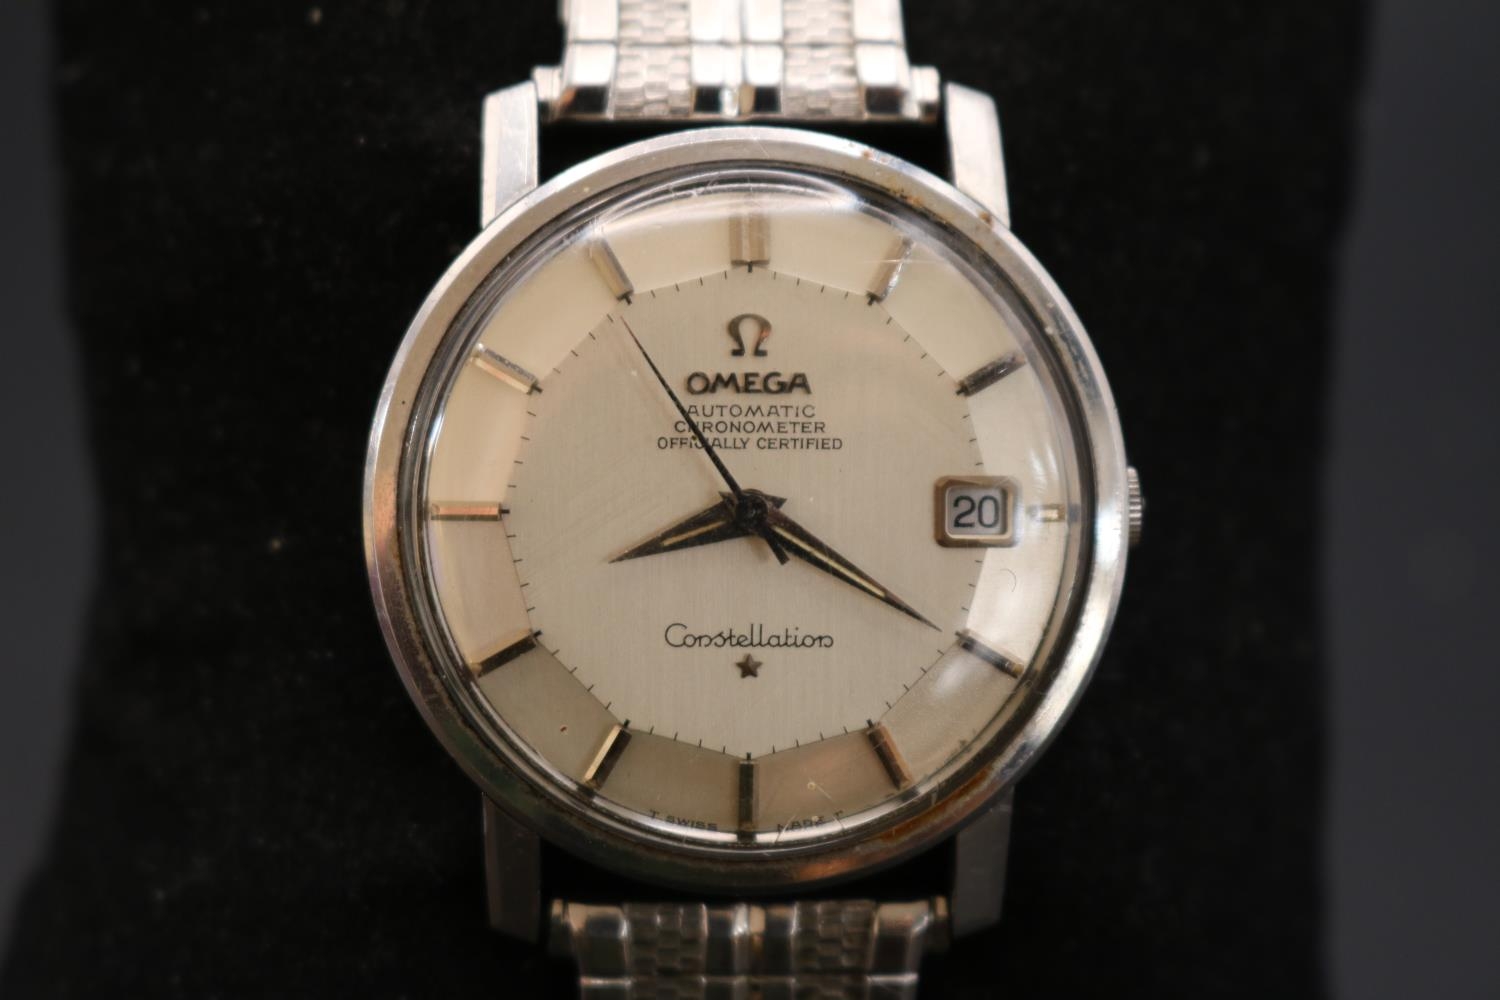 Omega Constellation Automatic Chronometer, pie-pan dial with day window and 21 jewel automatic Swiss - Image 2 of 4